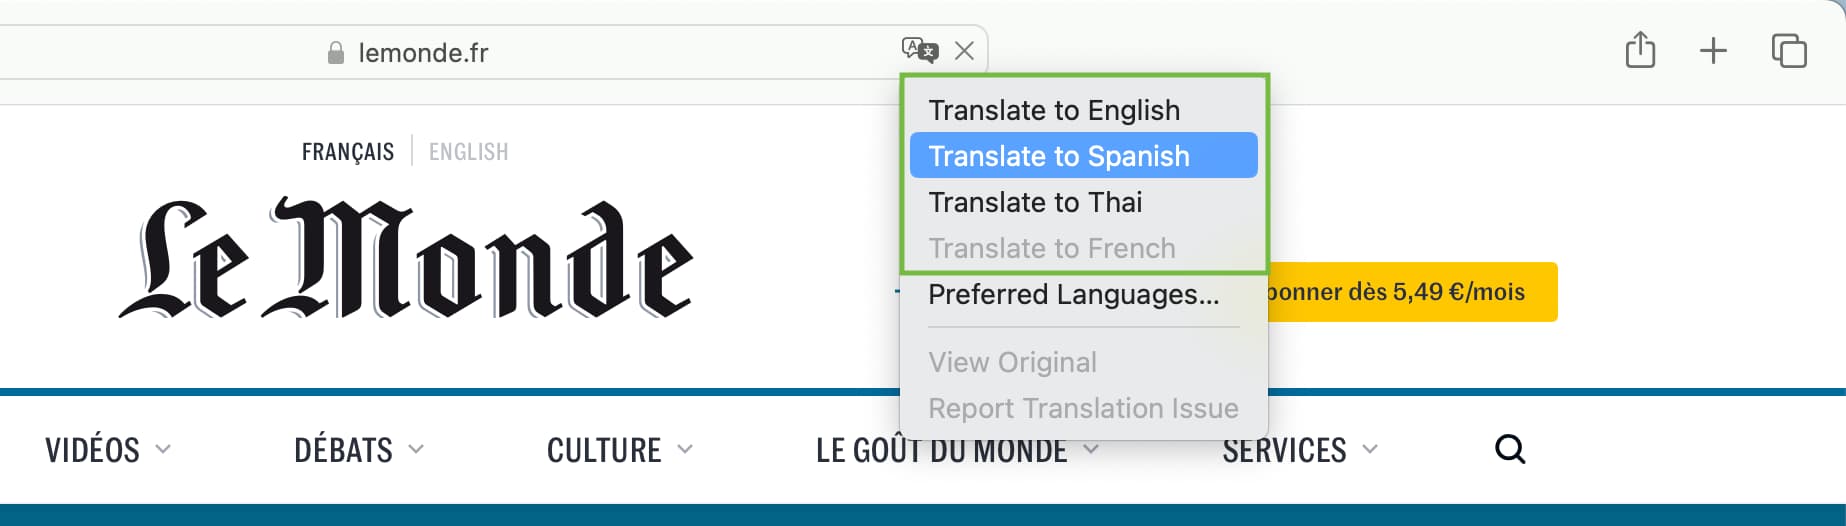 Option to translate web page into multiple languages in Safari on Mac